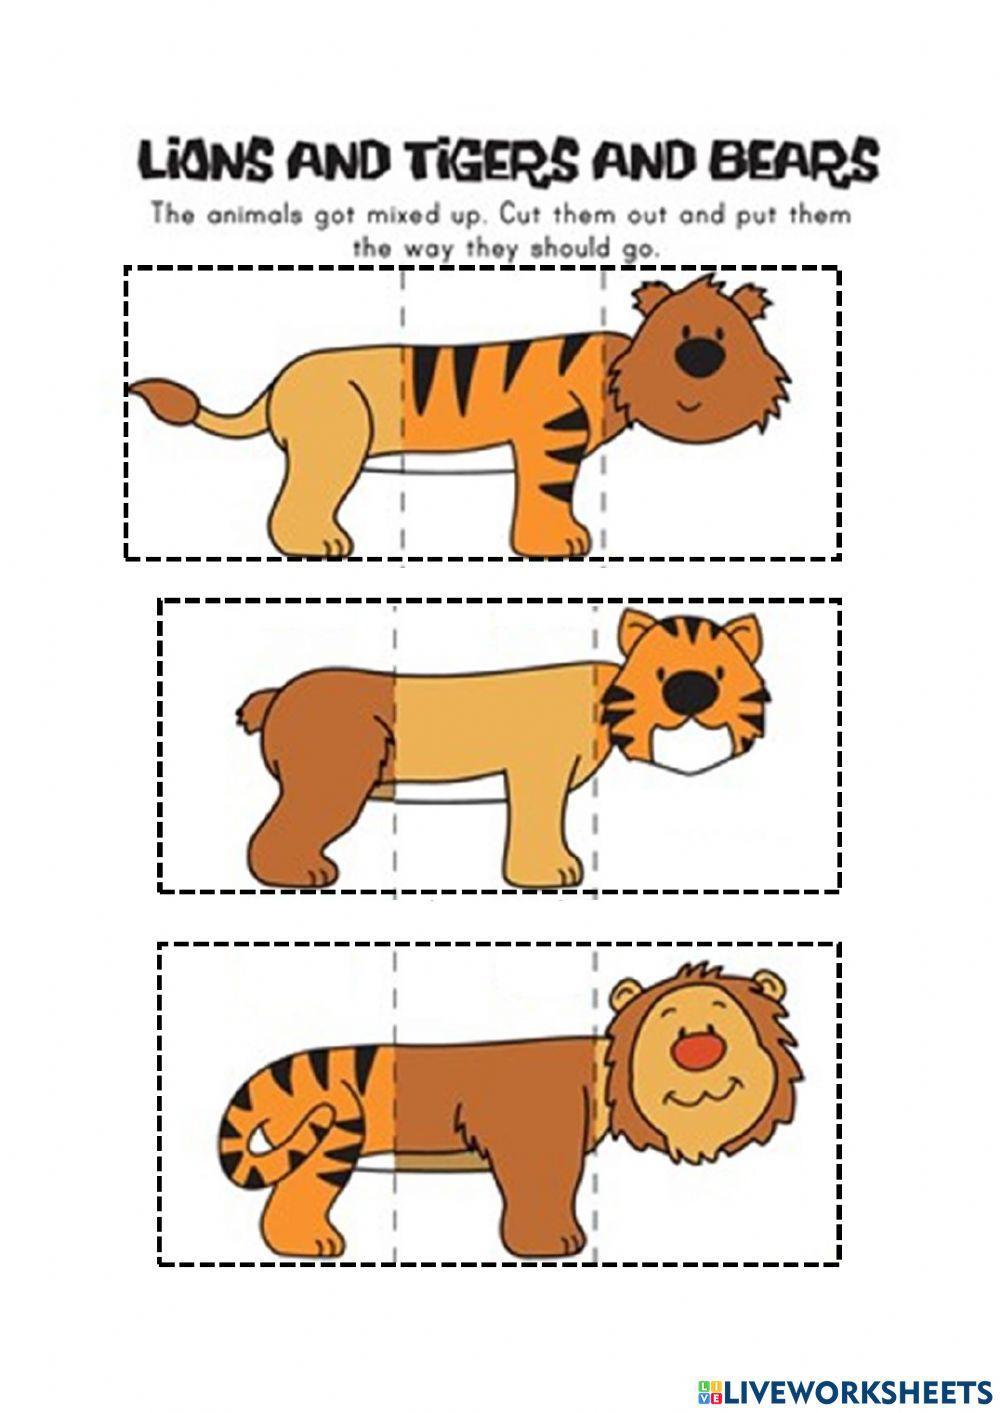 Tiger, Lion and Bear Puzzle